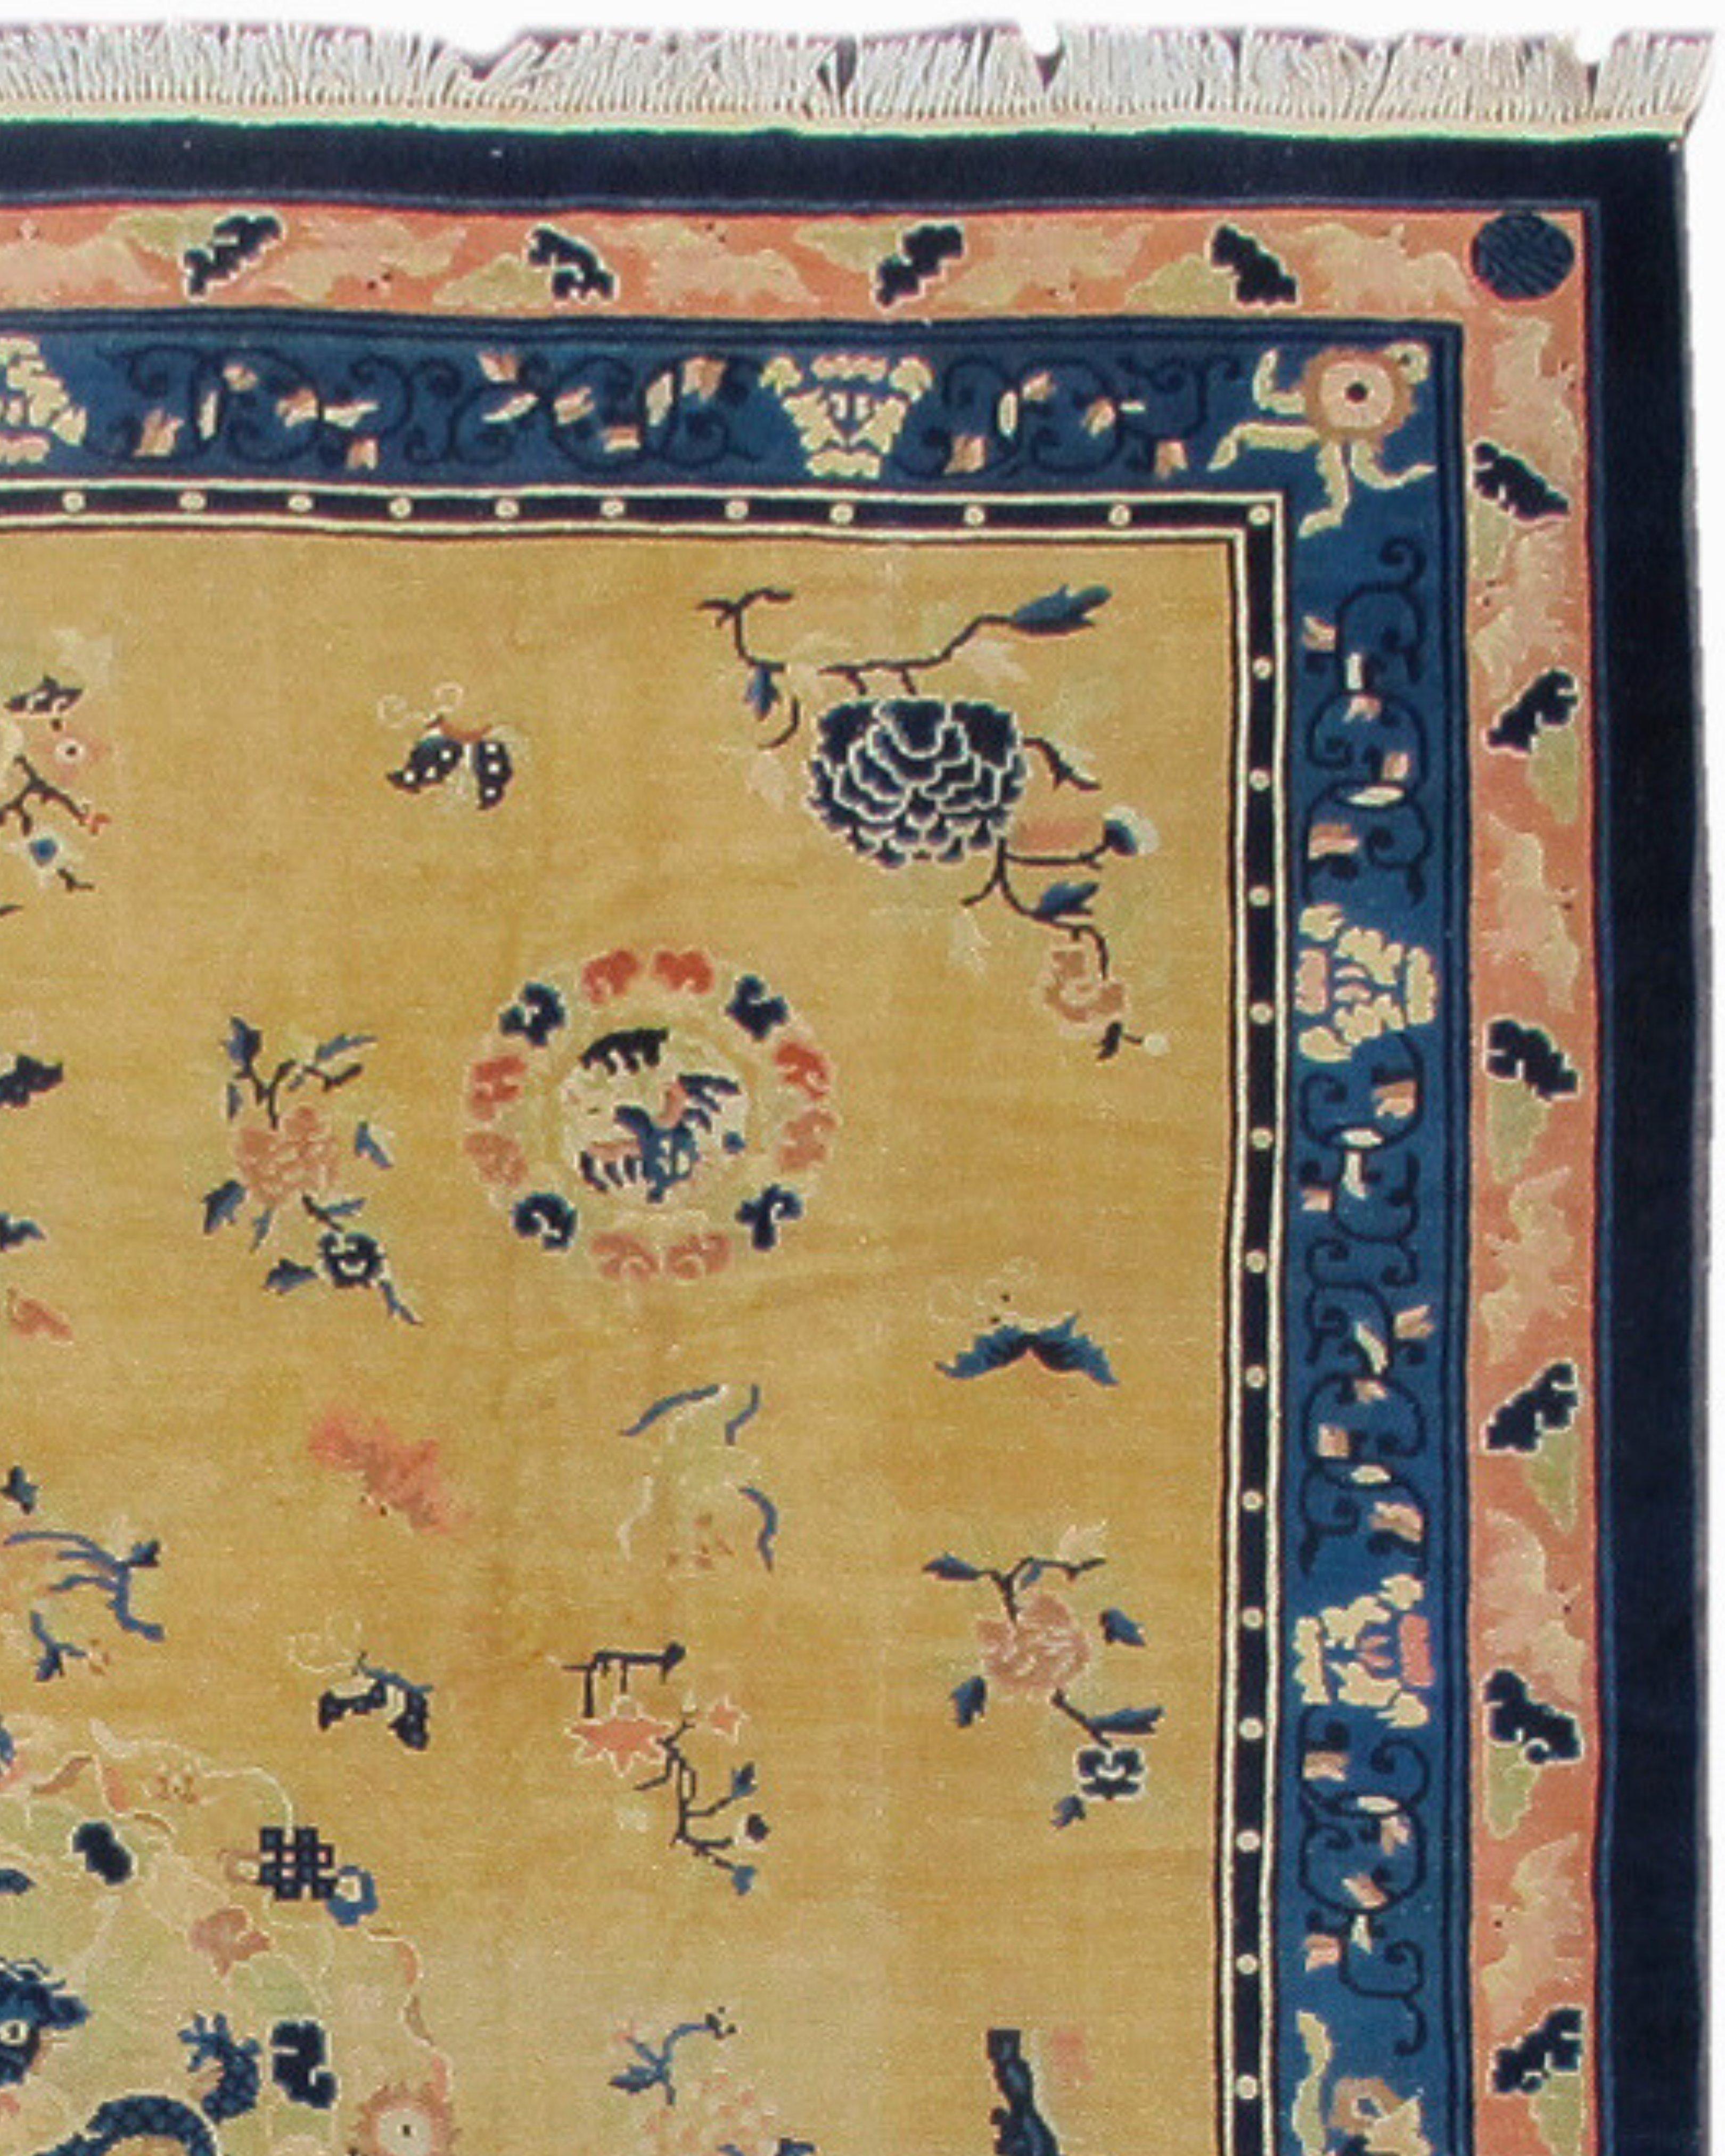 Hand-Woven Antique Chinese Peking Carpet, c. 1920 For Sale